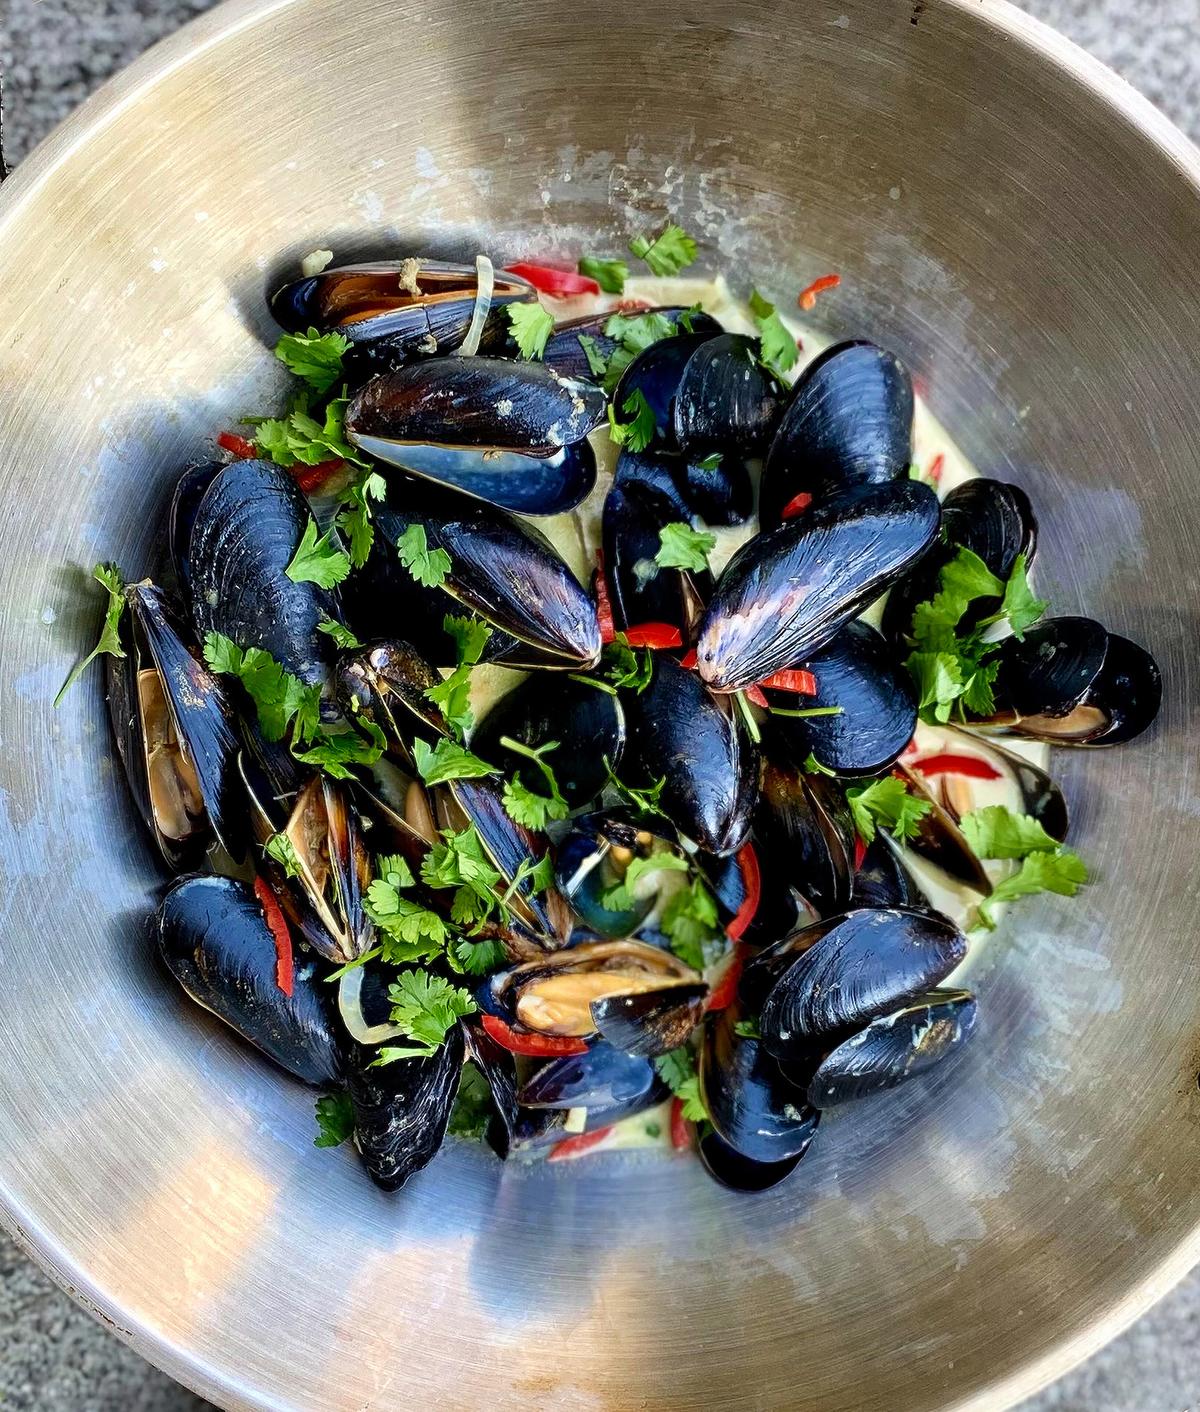 These Thai-style mussels are steamed in a heady concoction of coconut milk whisked with green curry paste and aromatics. (Lynda Balslev for Tastefood)